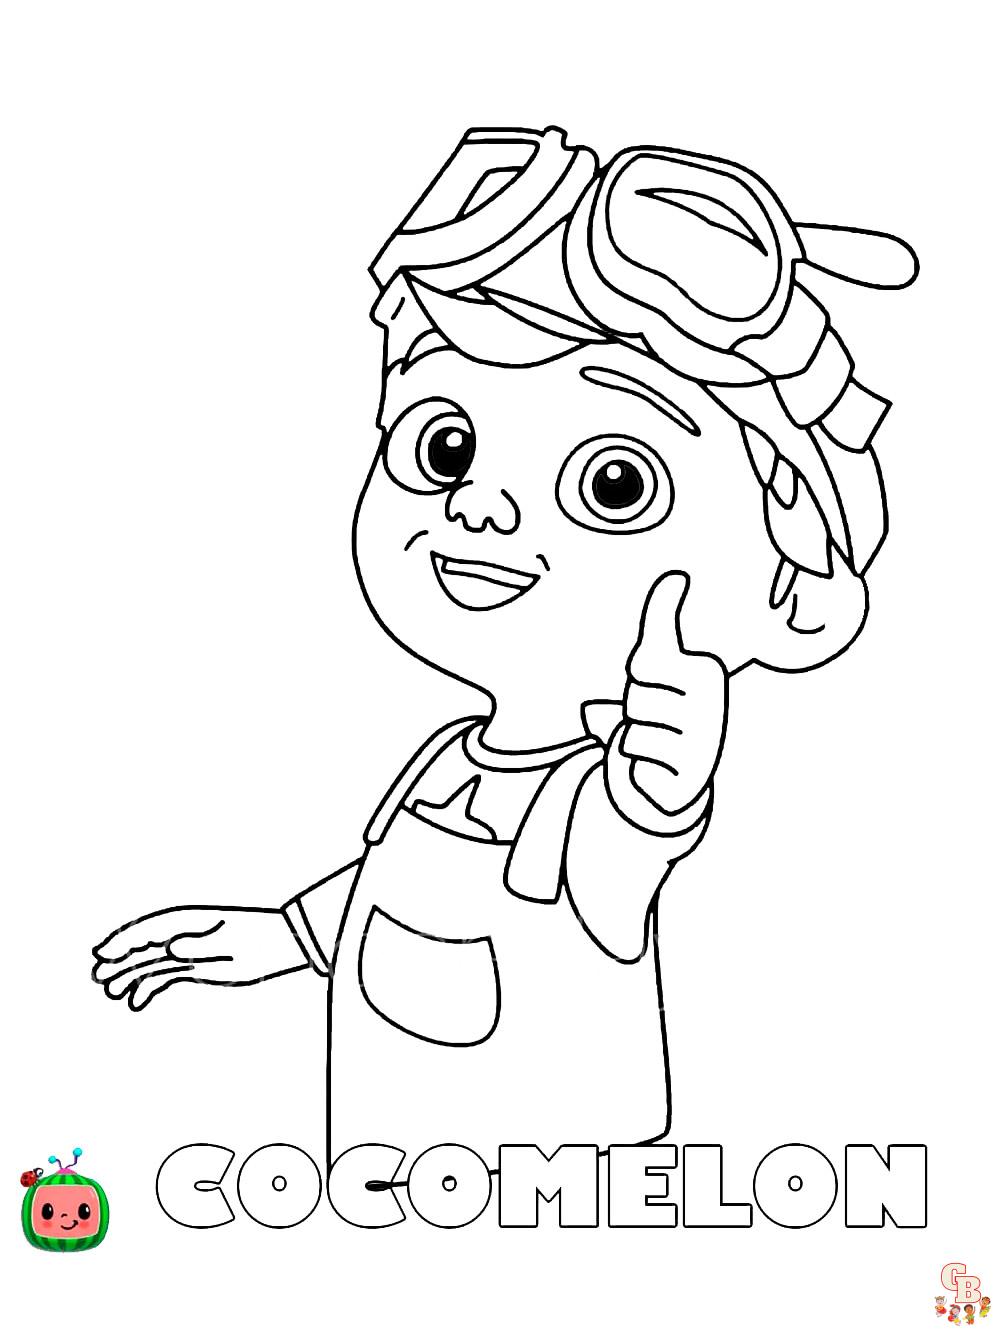 Cocomelon Coloring Pages 25